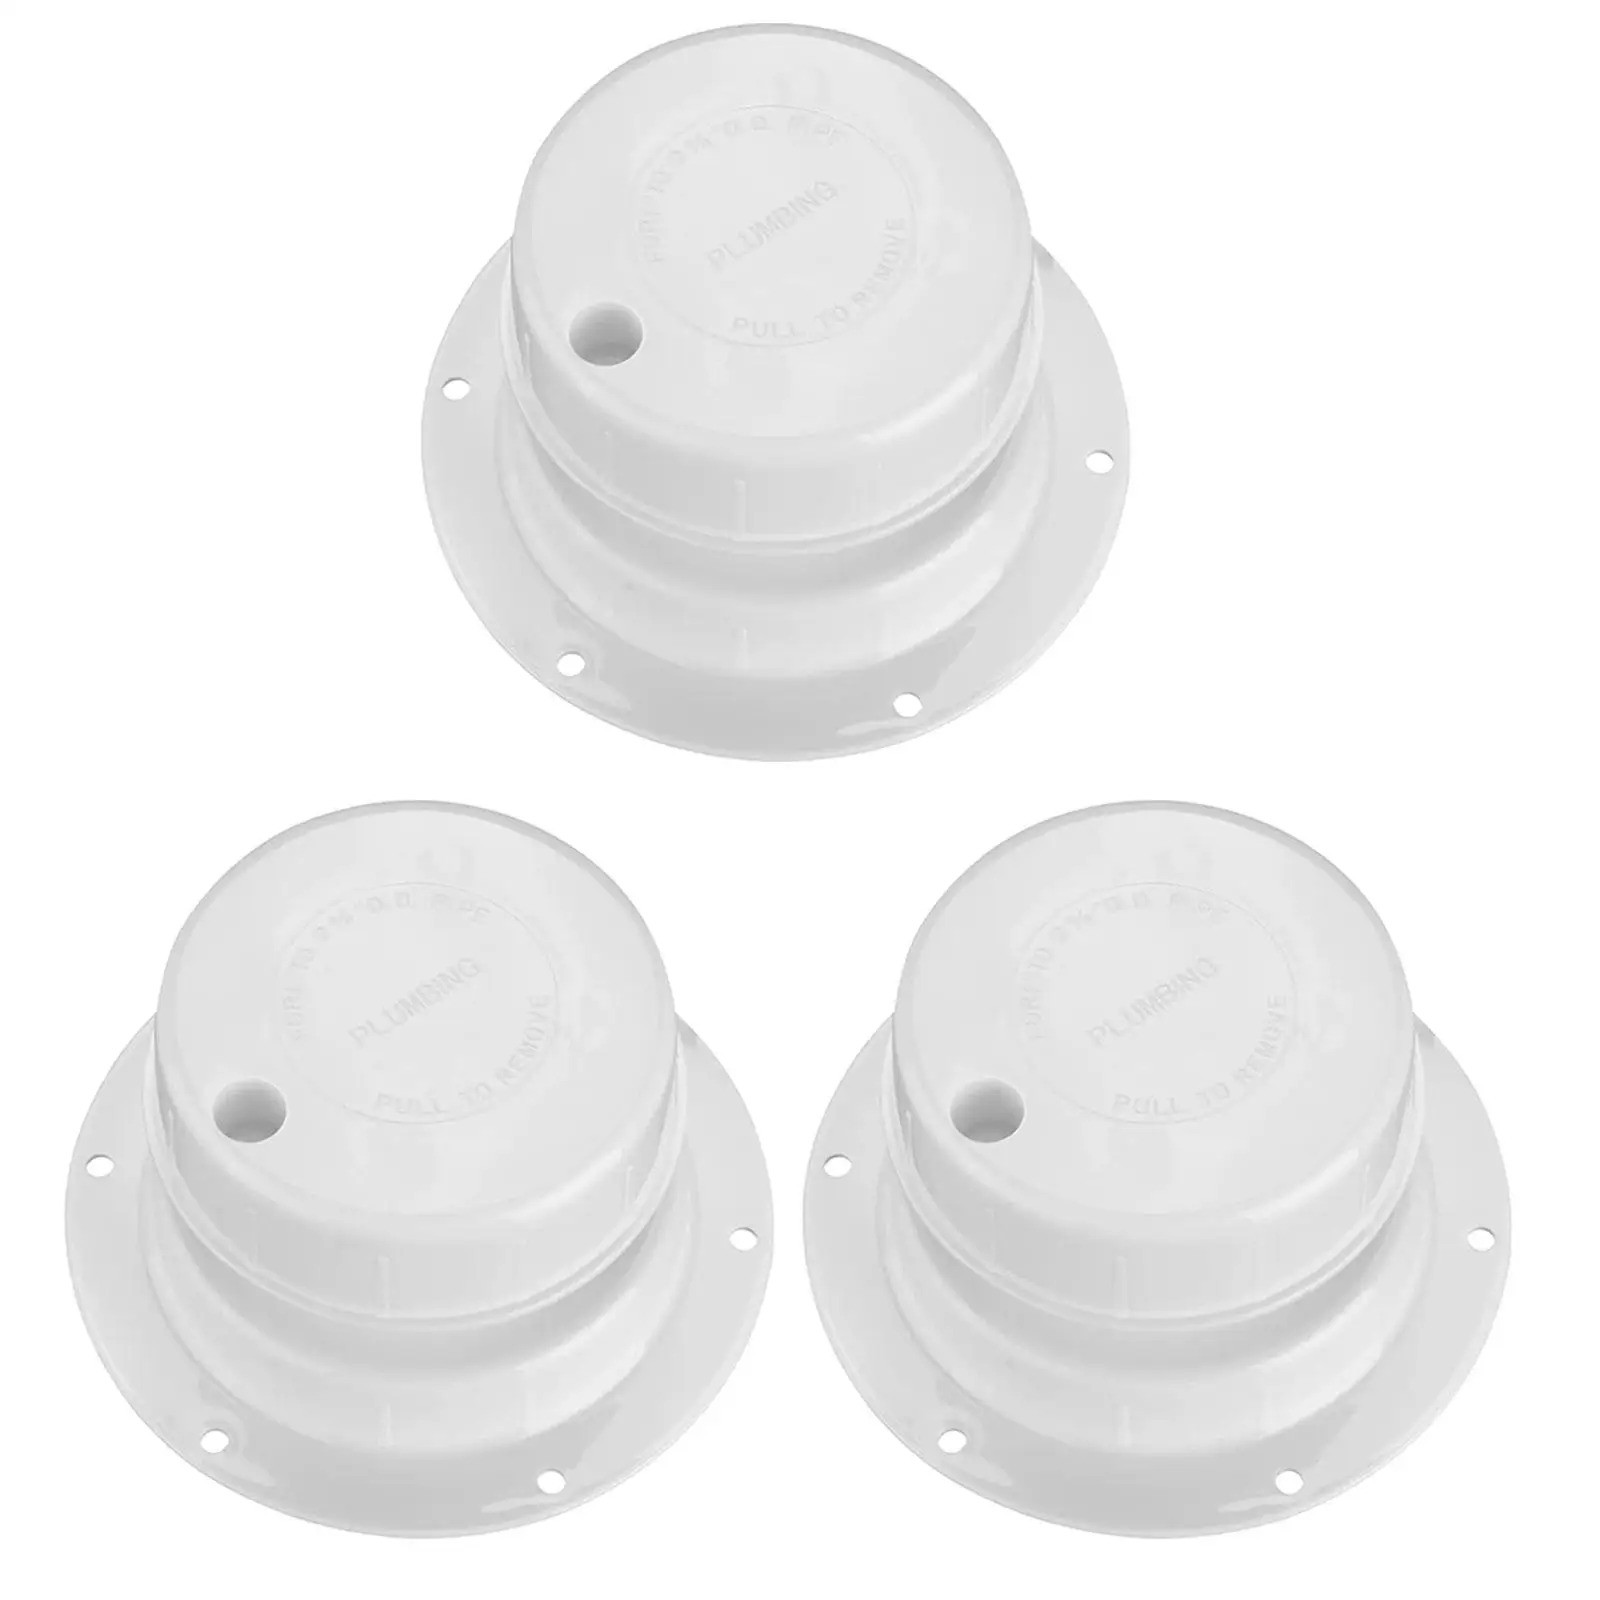 

RV Plumbing Vent Cap for 1 to 2 3/8" Pipe Replace White RV Sewer Vent Cap Camper Vent Cap for RV Motorhome Trailers Campers